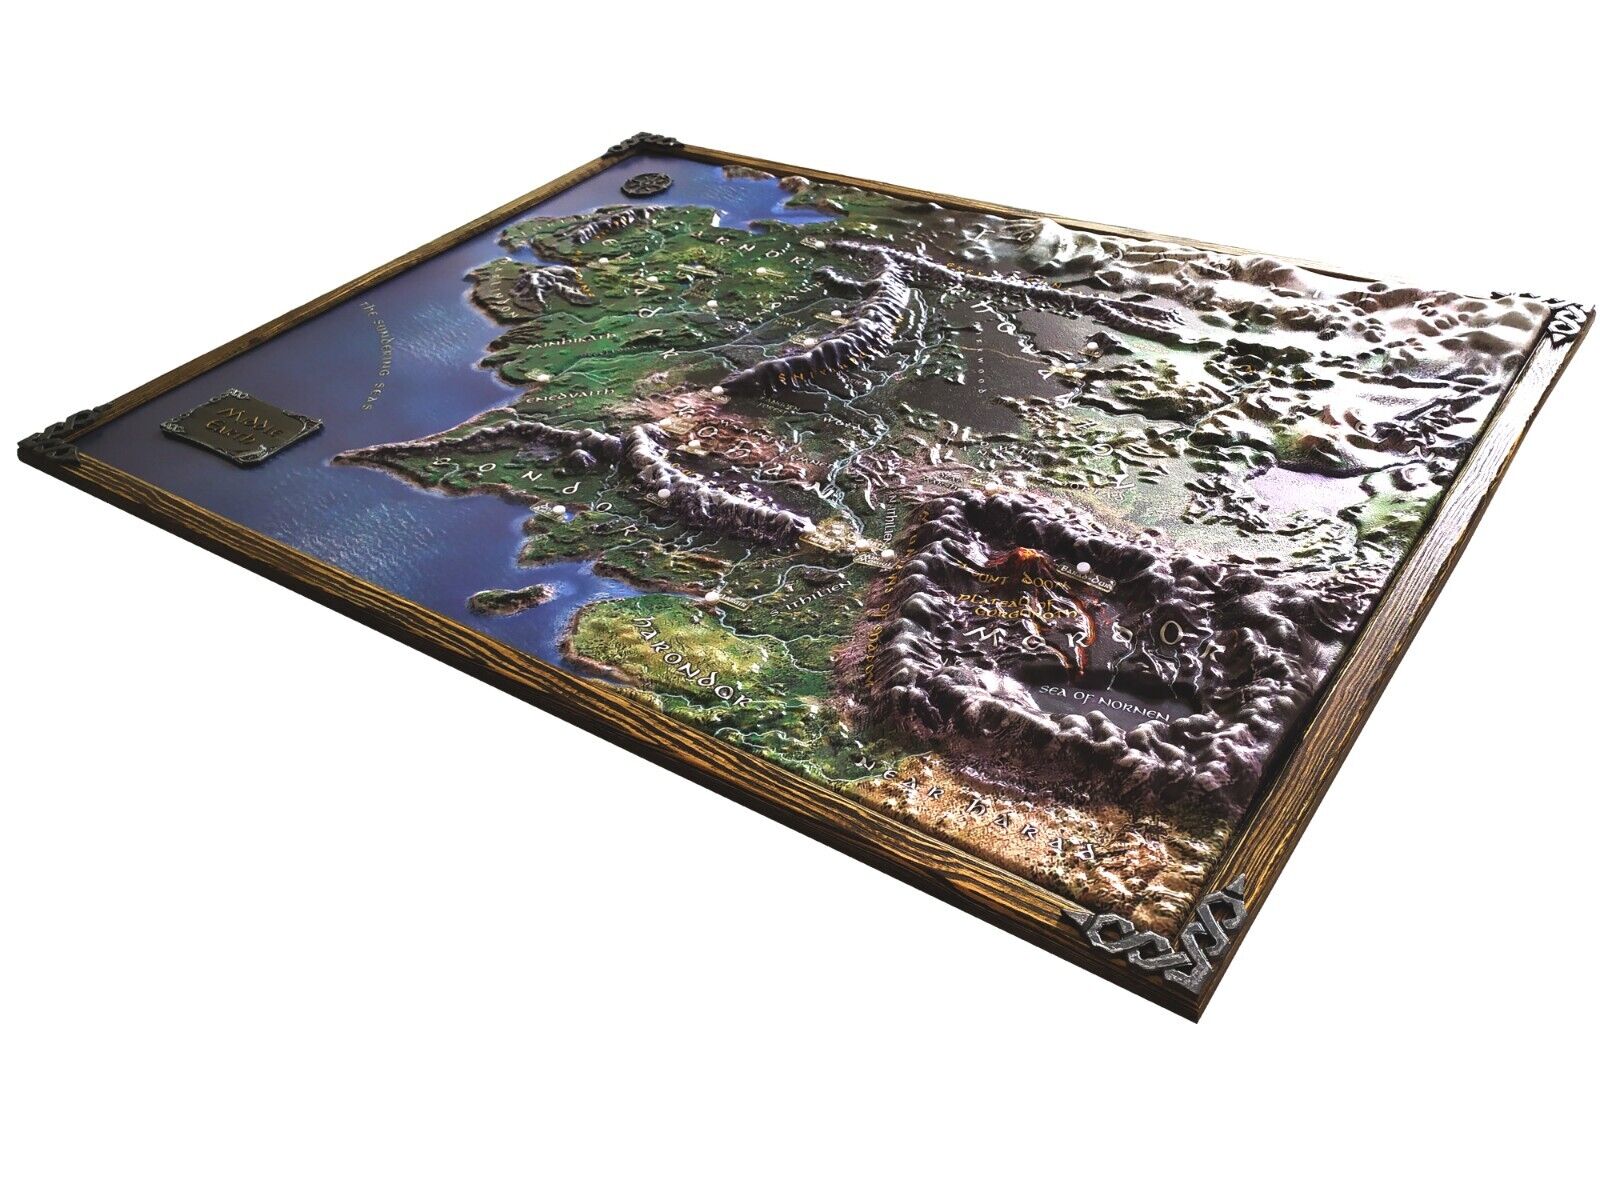 Journey Through Middle-earth: Exclusive 3D Map of The Lord of the Rings by J.R.R